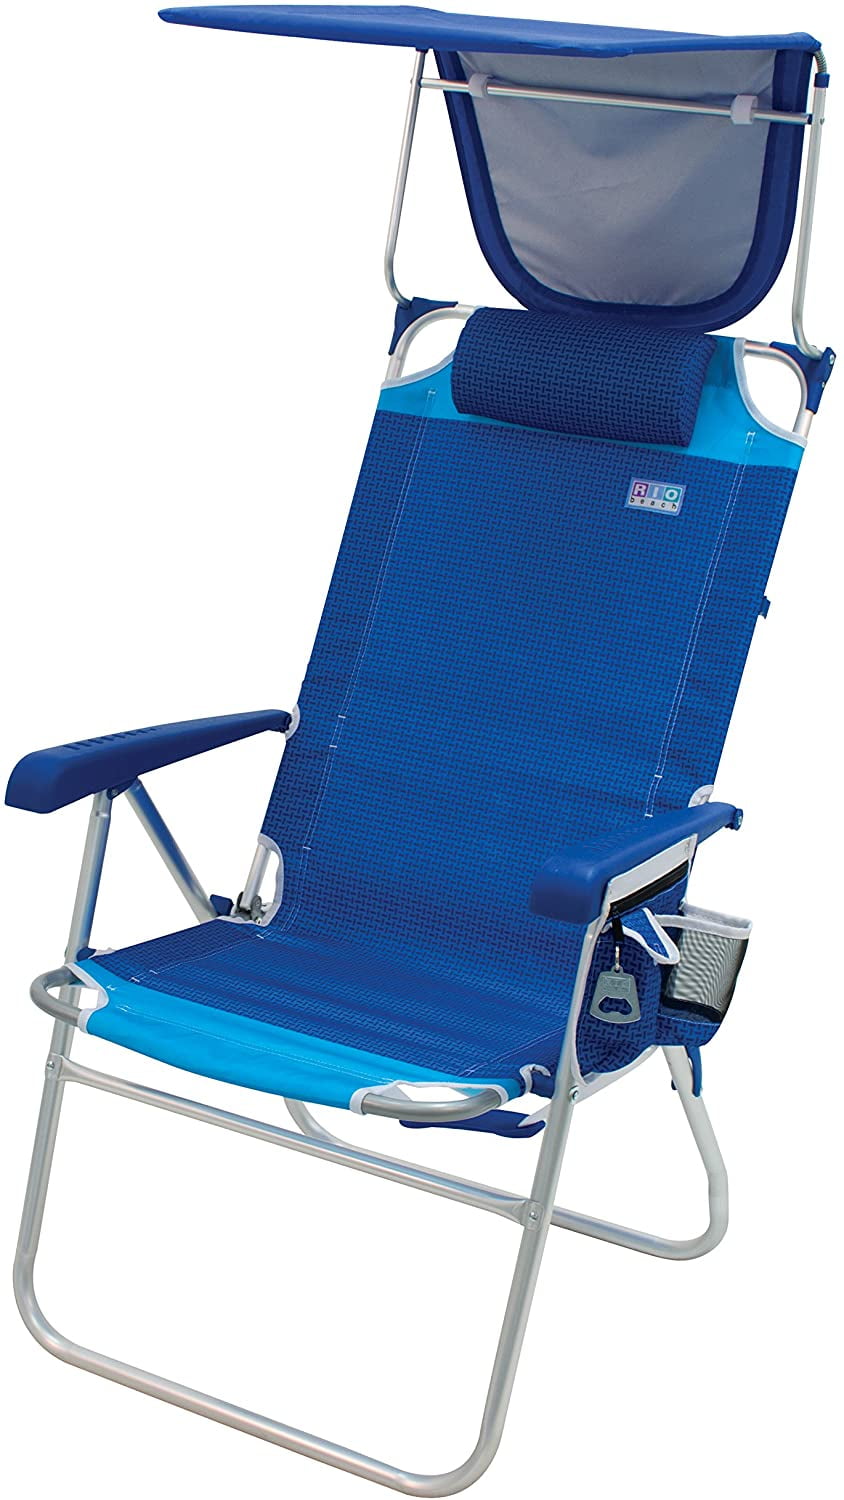 Rio Beach Chair With Canopy - www.inf-inet.com